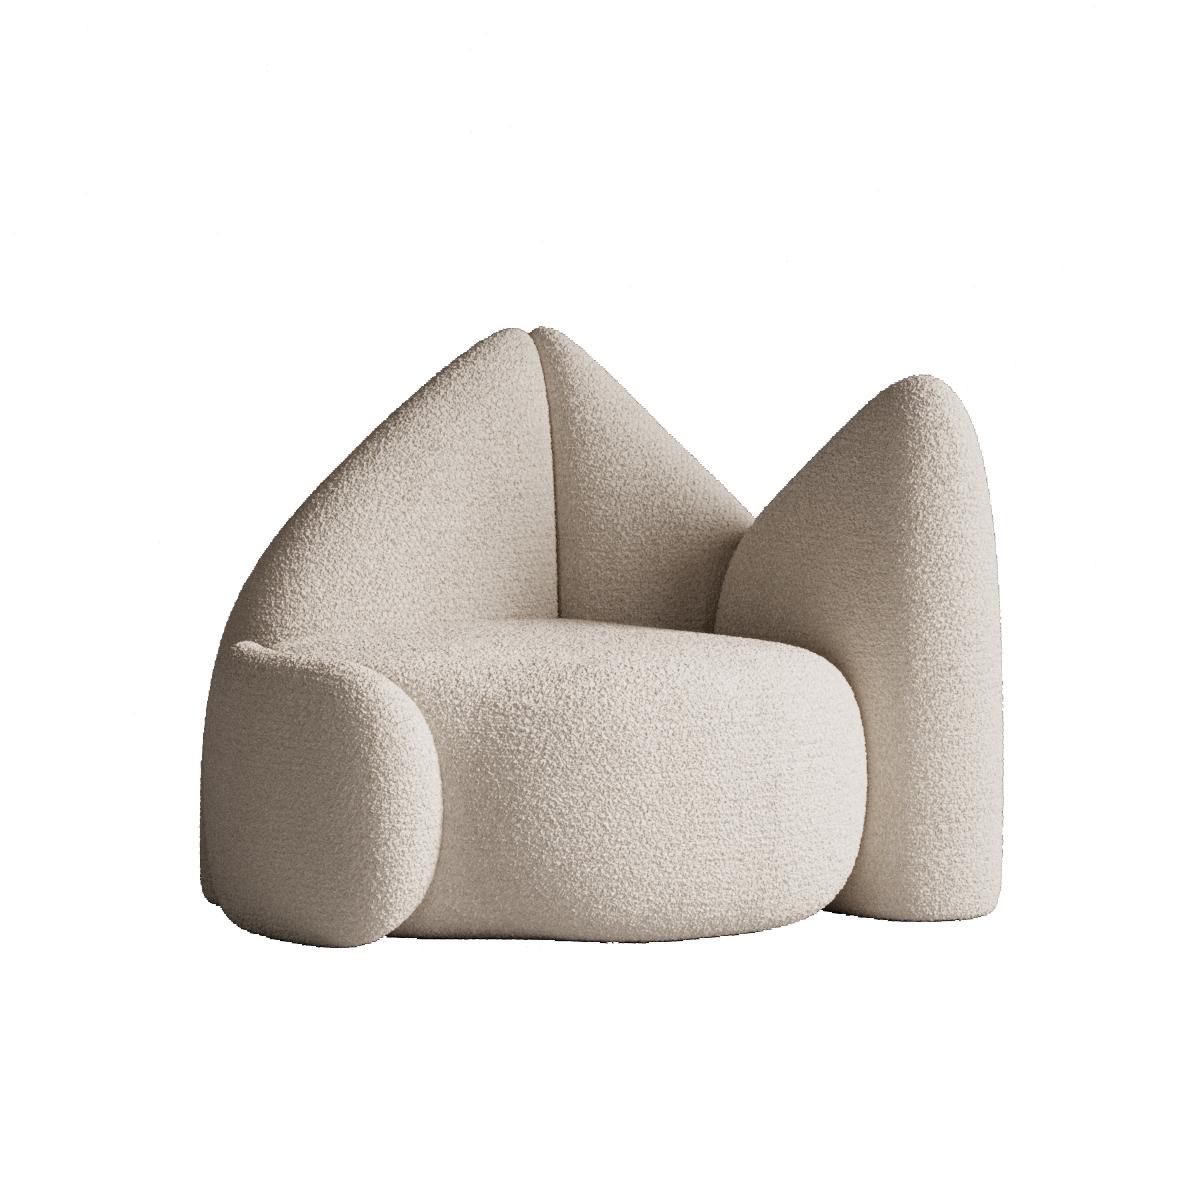 Fjord Chair by Plyus Design
Dimensions: D 85 x W 110 x H 80 cm
Materials:  Wood, HR foam, polyester wadding, fabric upholstery.



PLYUS Furniture creates pieces in collectible design segment. We create modern, ergonomic furniture in a minimalist